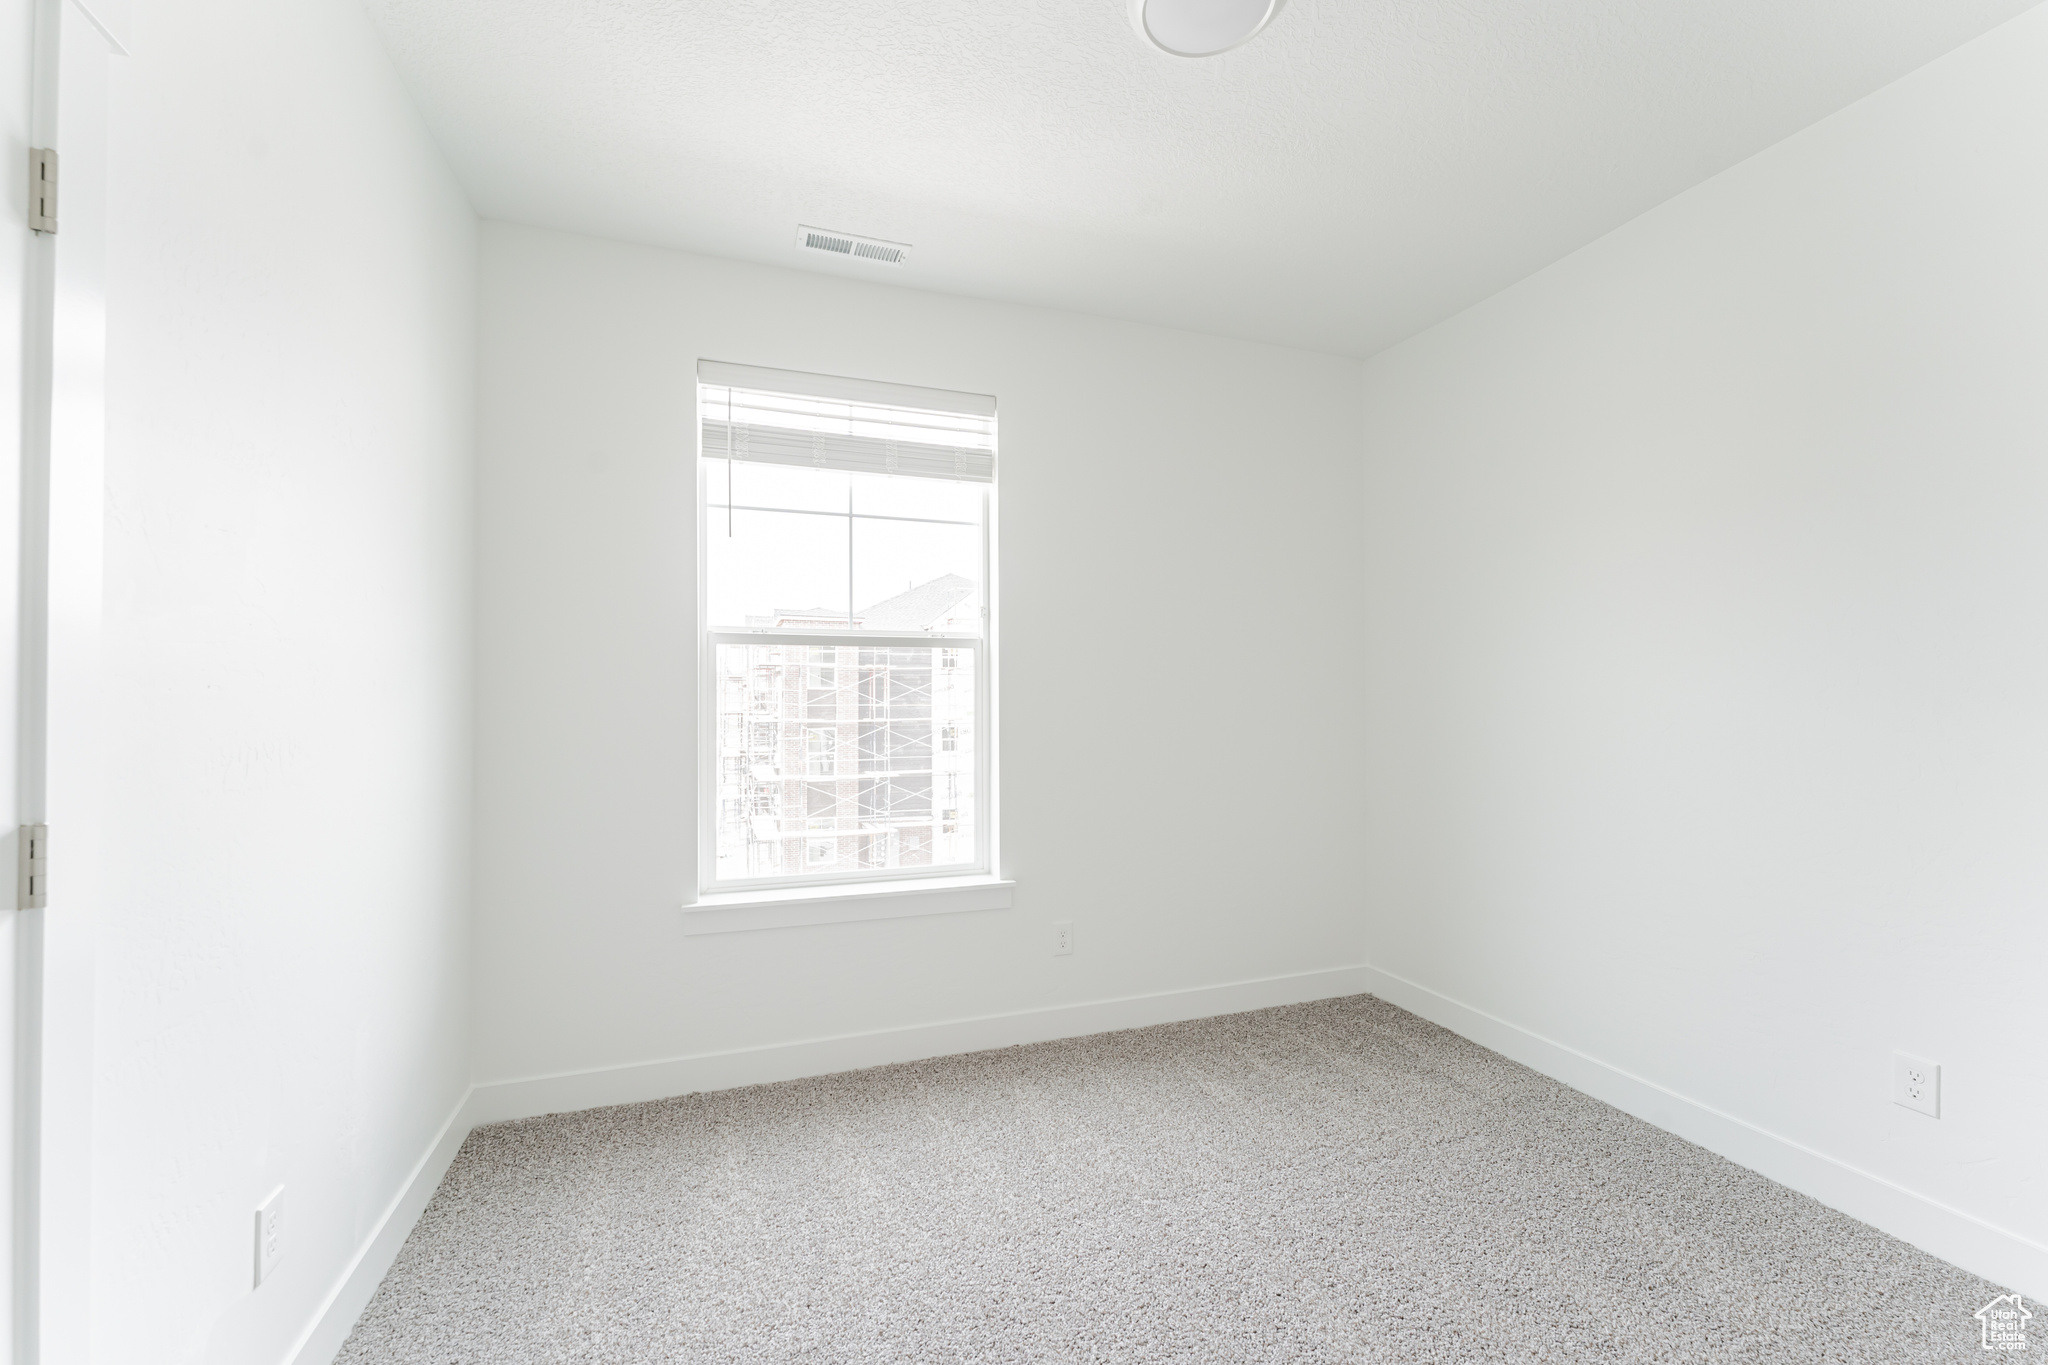 Empty room with plenty of natural light and light carpet